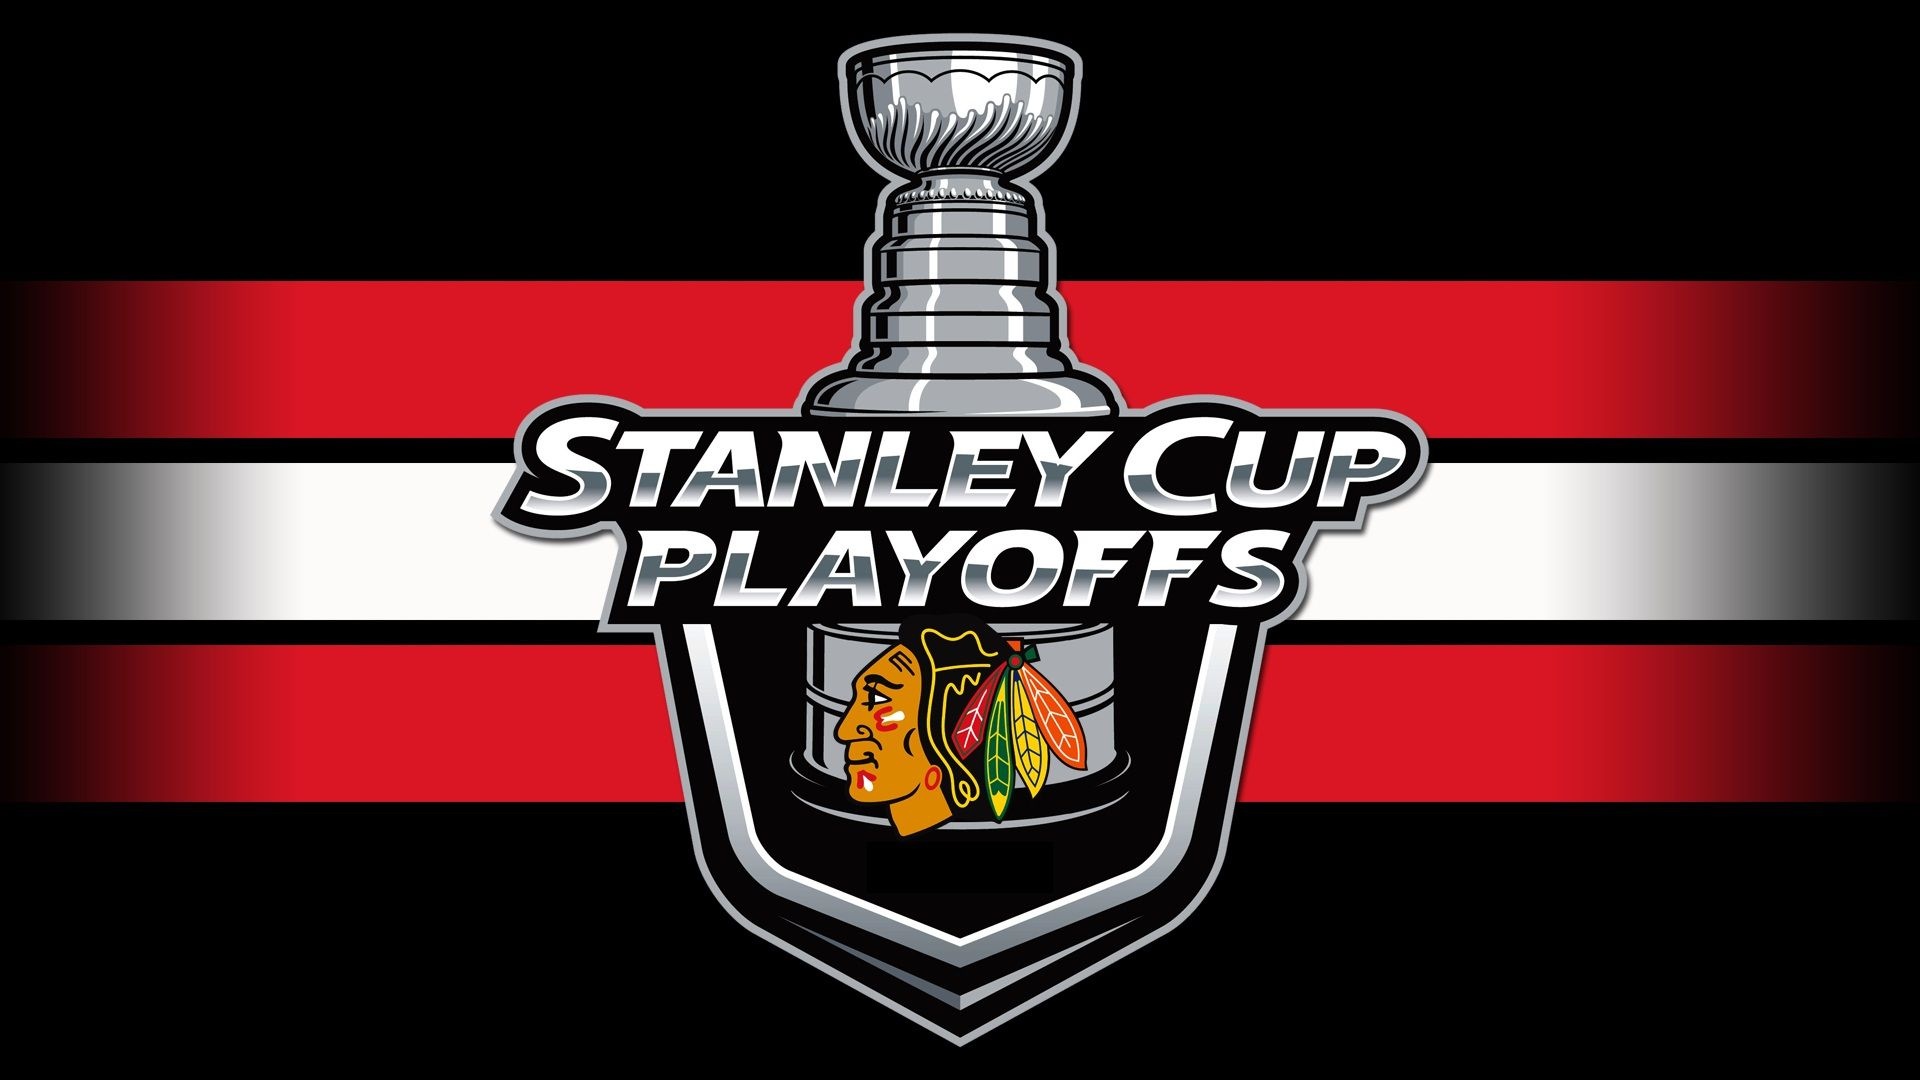 Chicago Blackhawks: Stanley Cup, 2022, NHL, Central Division. 1920x1080 Full HD Wallpaper.